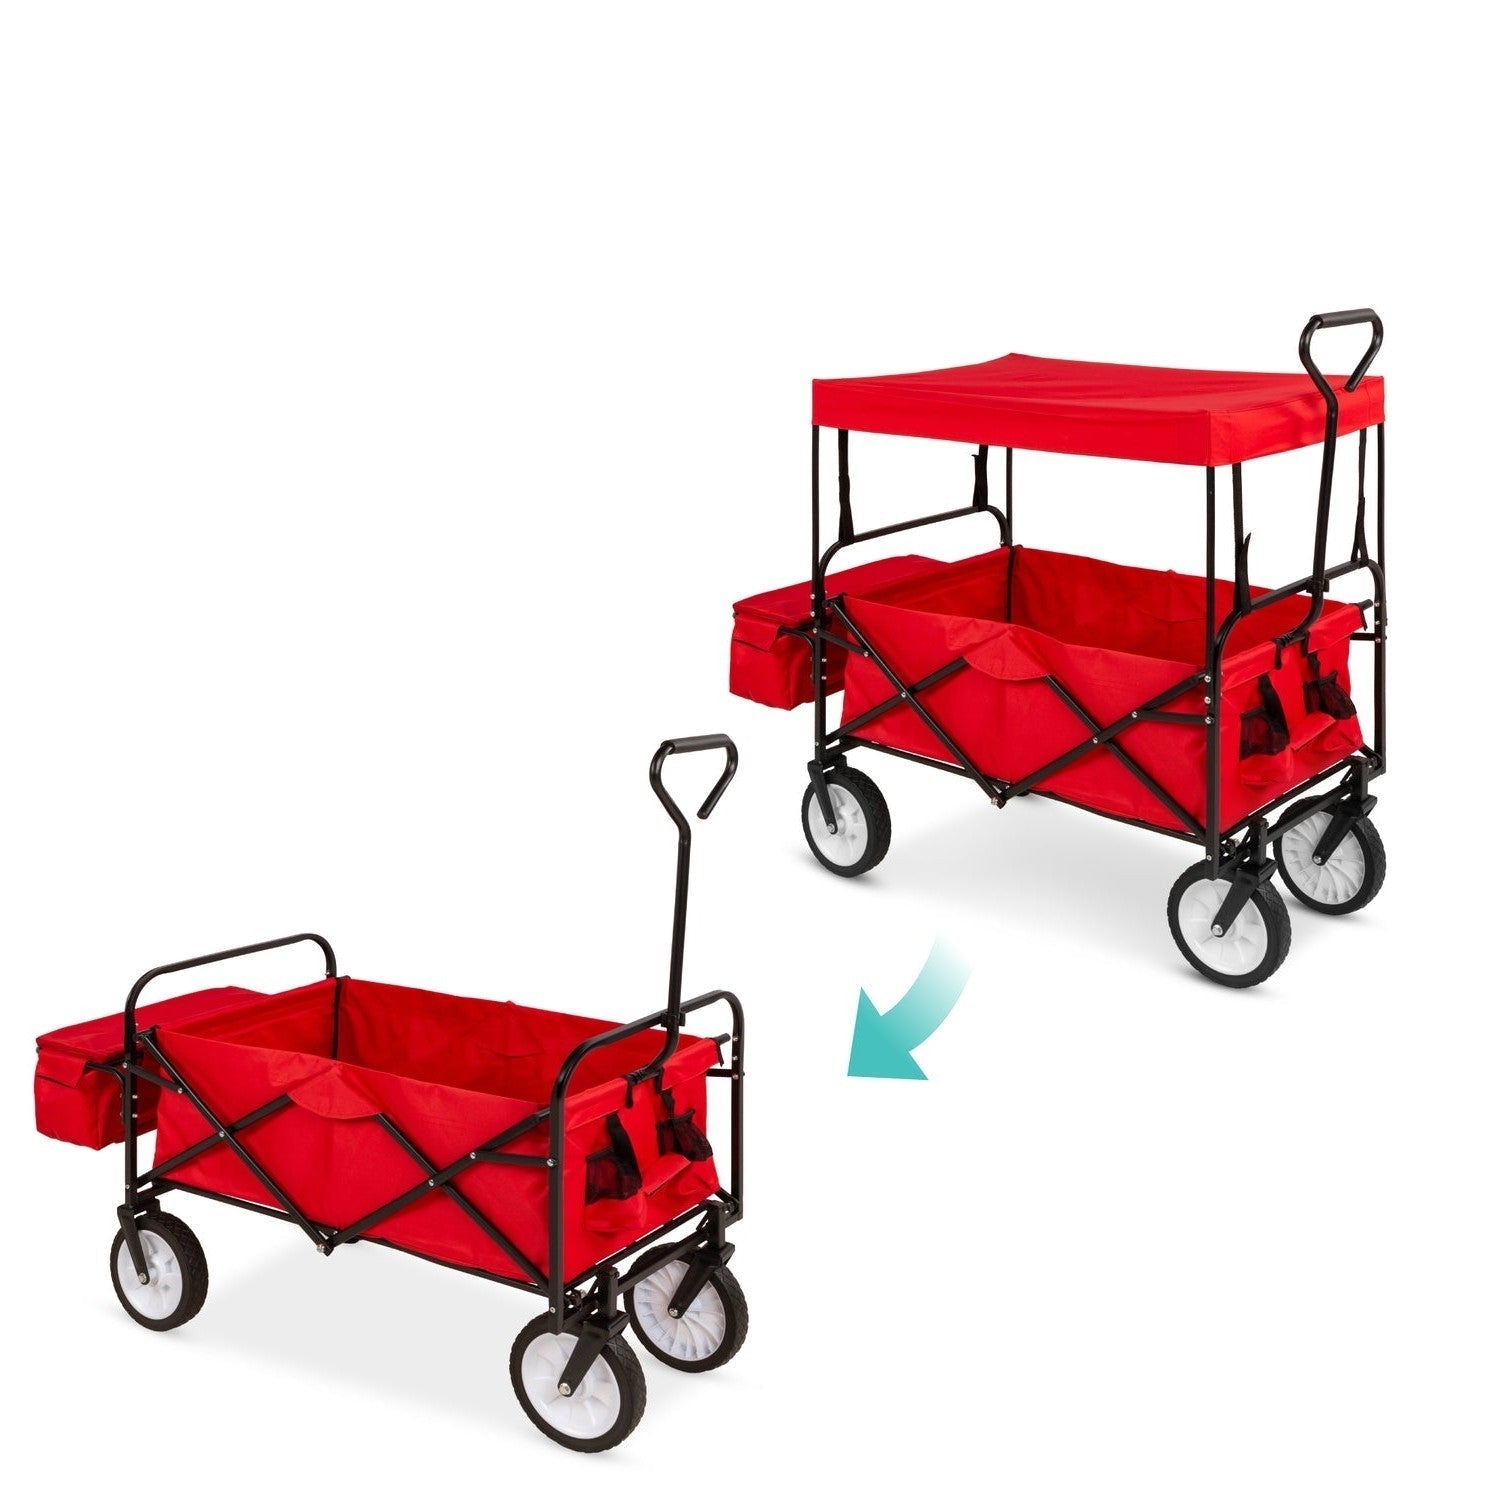 Outdoor > Gardening > Wheelbarrows Carts Wagons - Collapsible Utility Wagon Cart Indoor/Outdoor With Canopy - Red